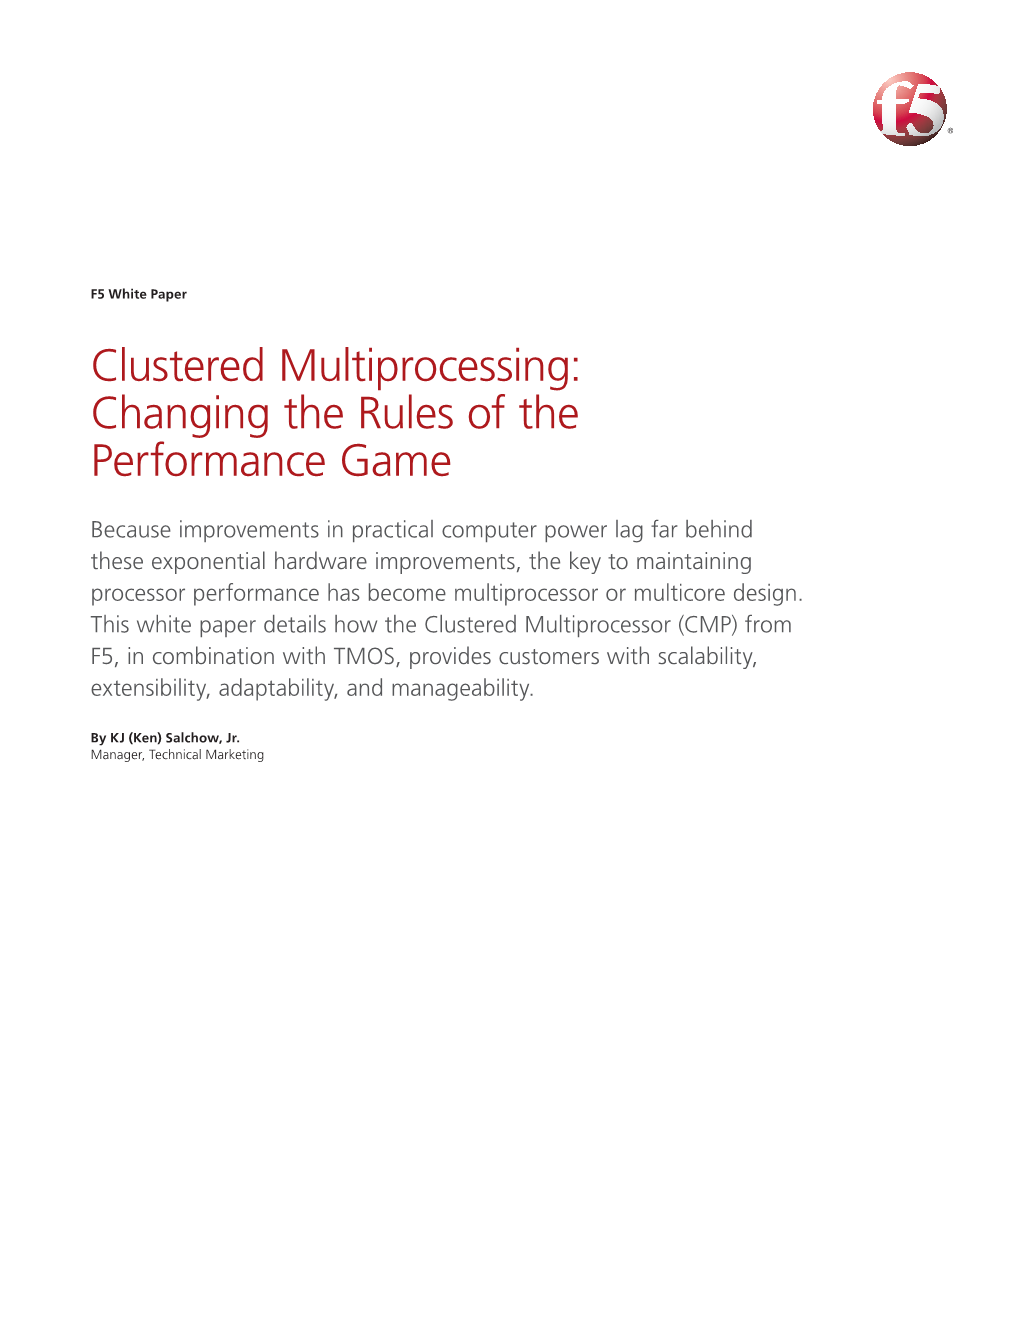 Clustered Multiprocessing: Changing the Rules of the Performance Game